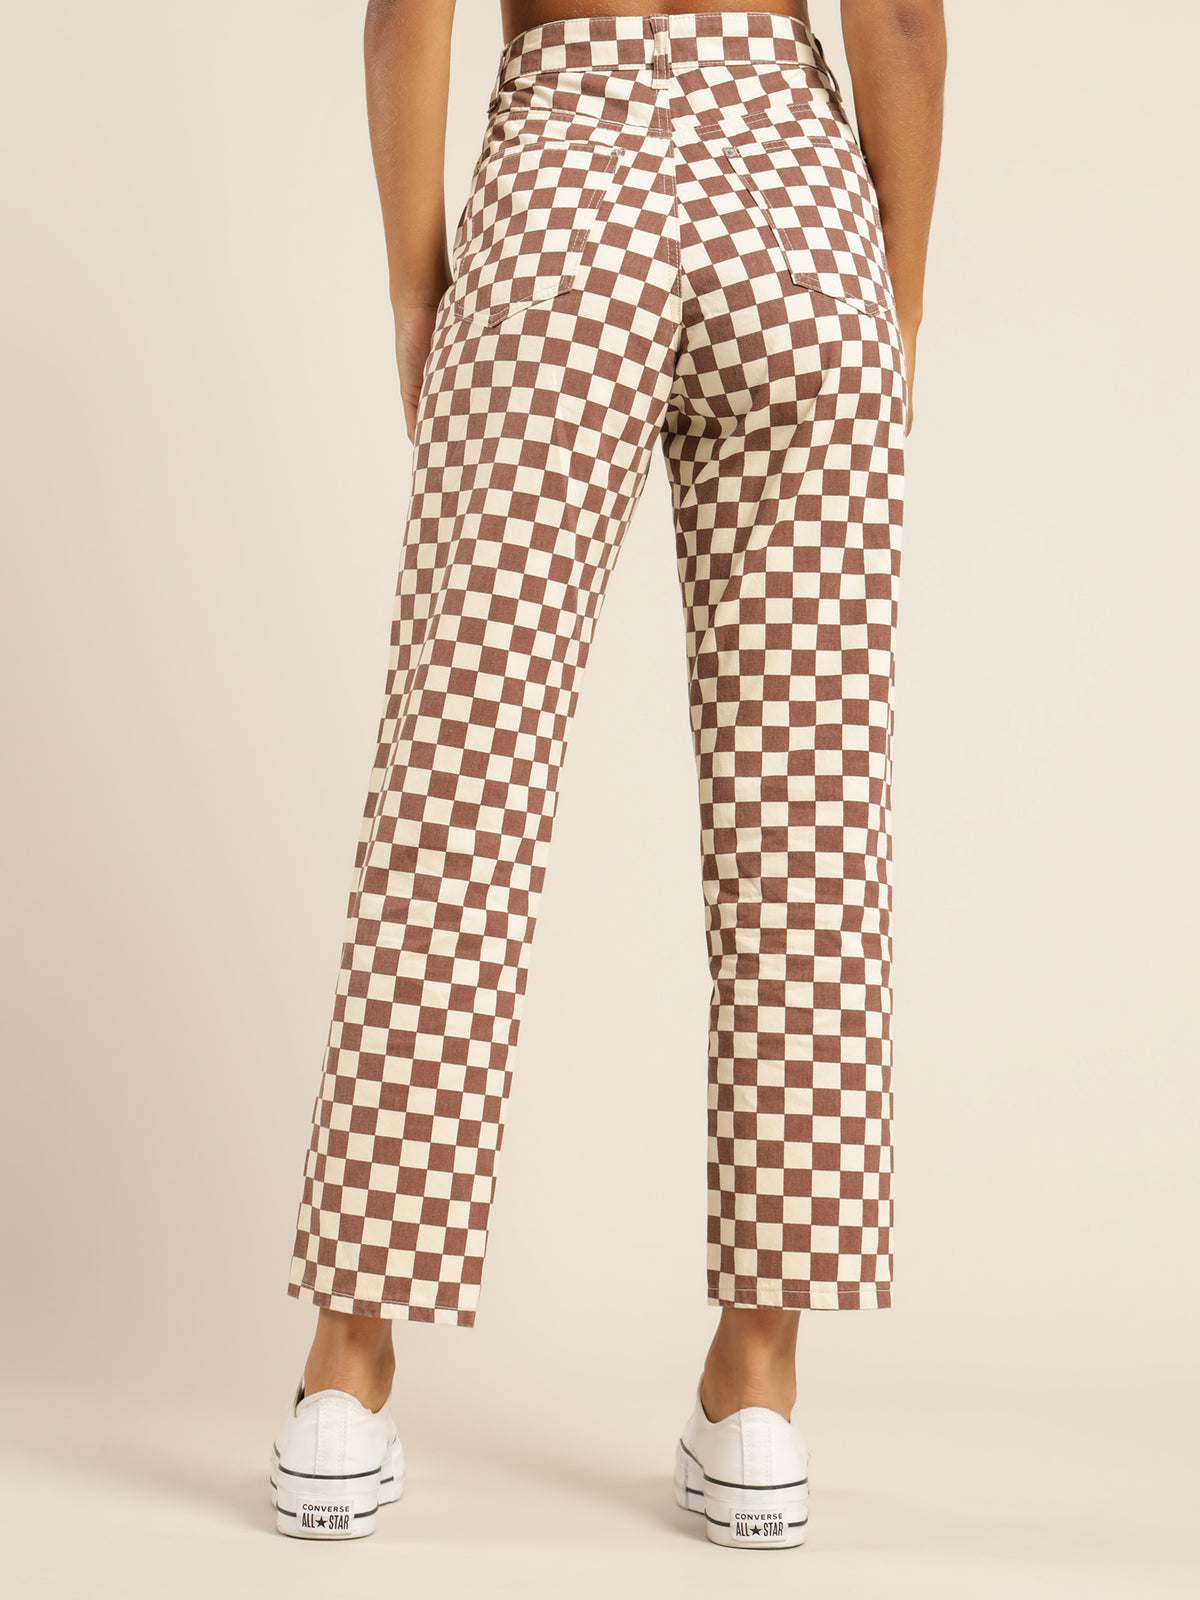 April Checkerboard Jeans in Berry